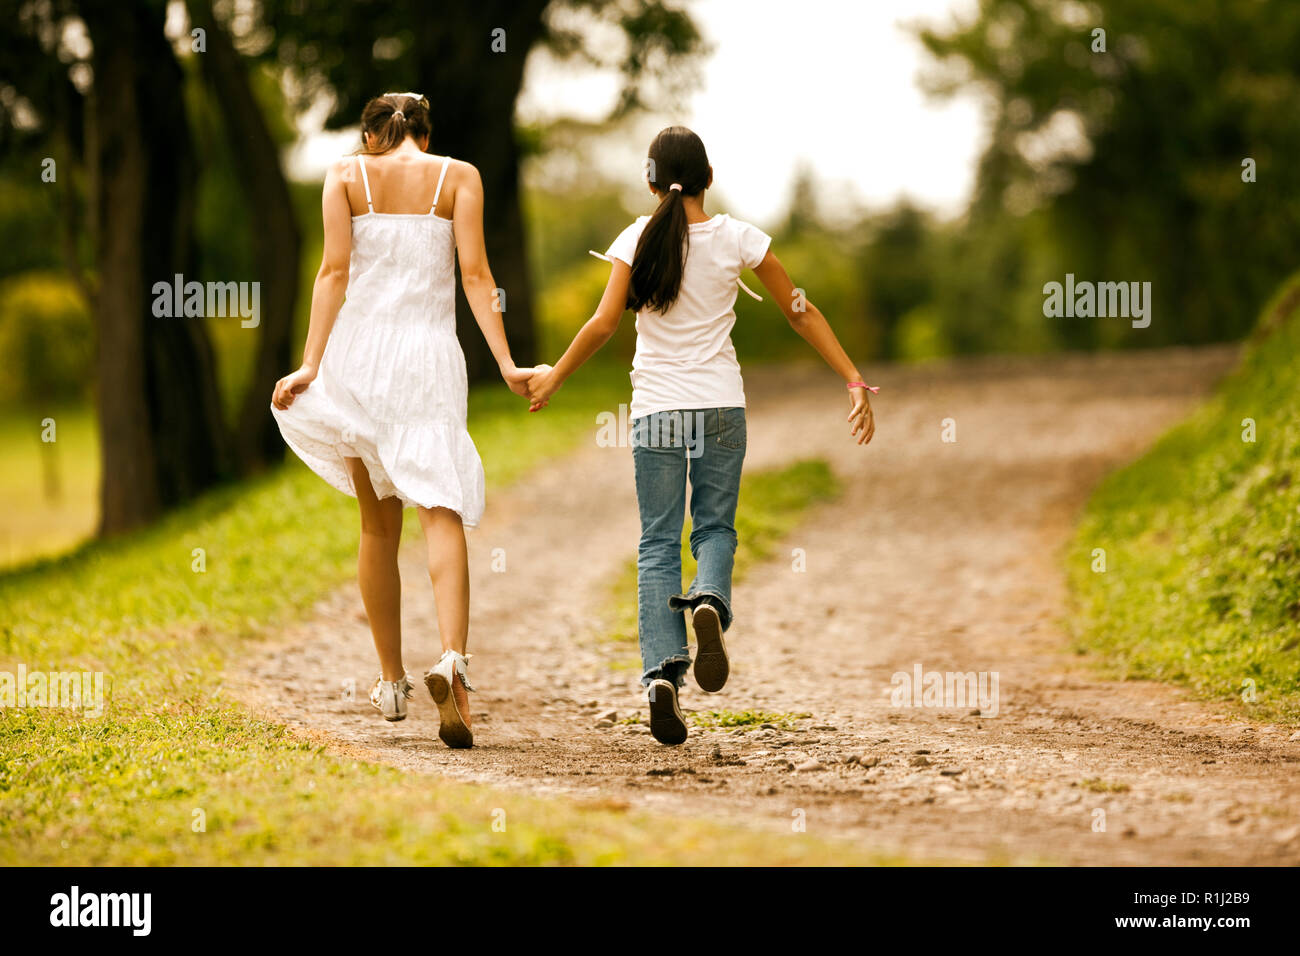 Teenage girl walking hand in hand with her younger sister. Stock Photo